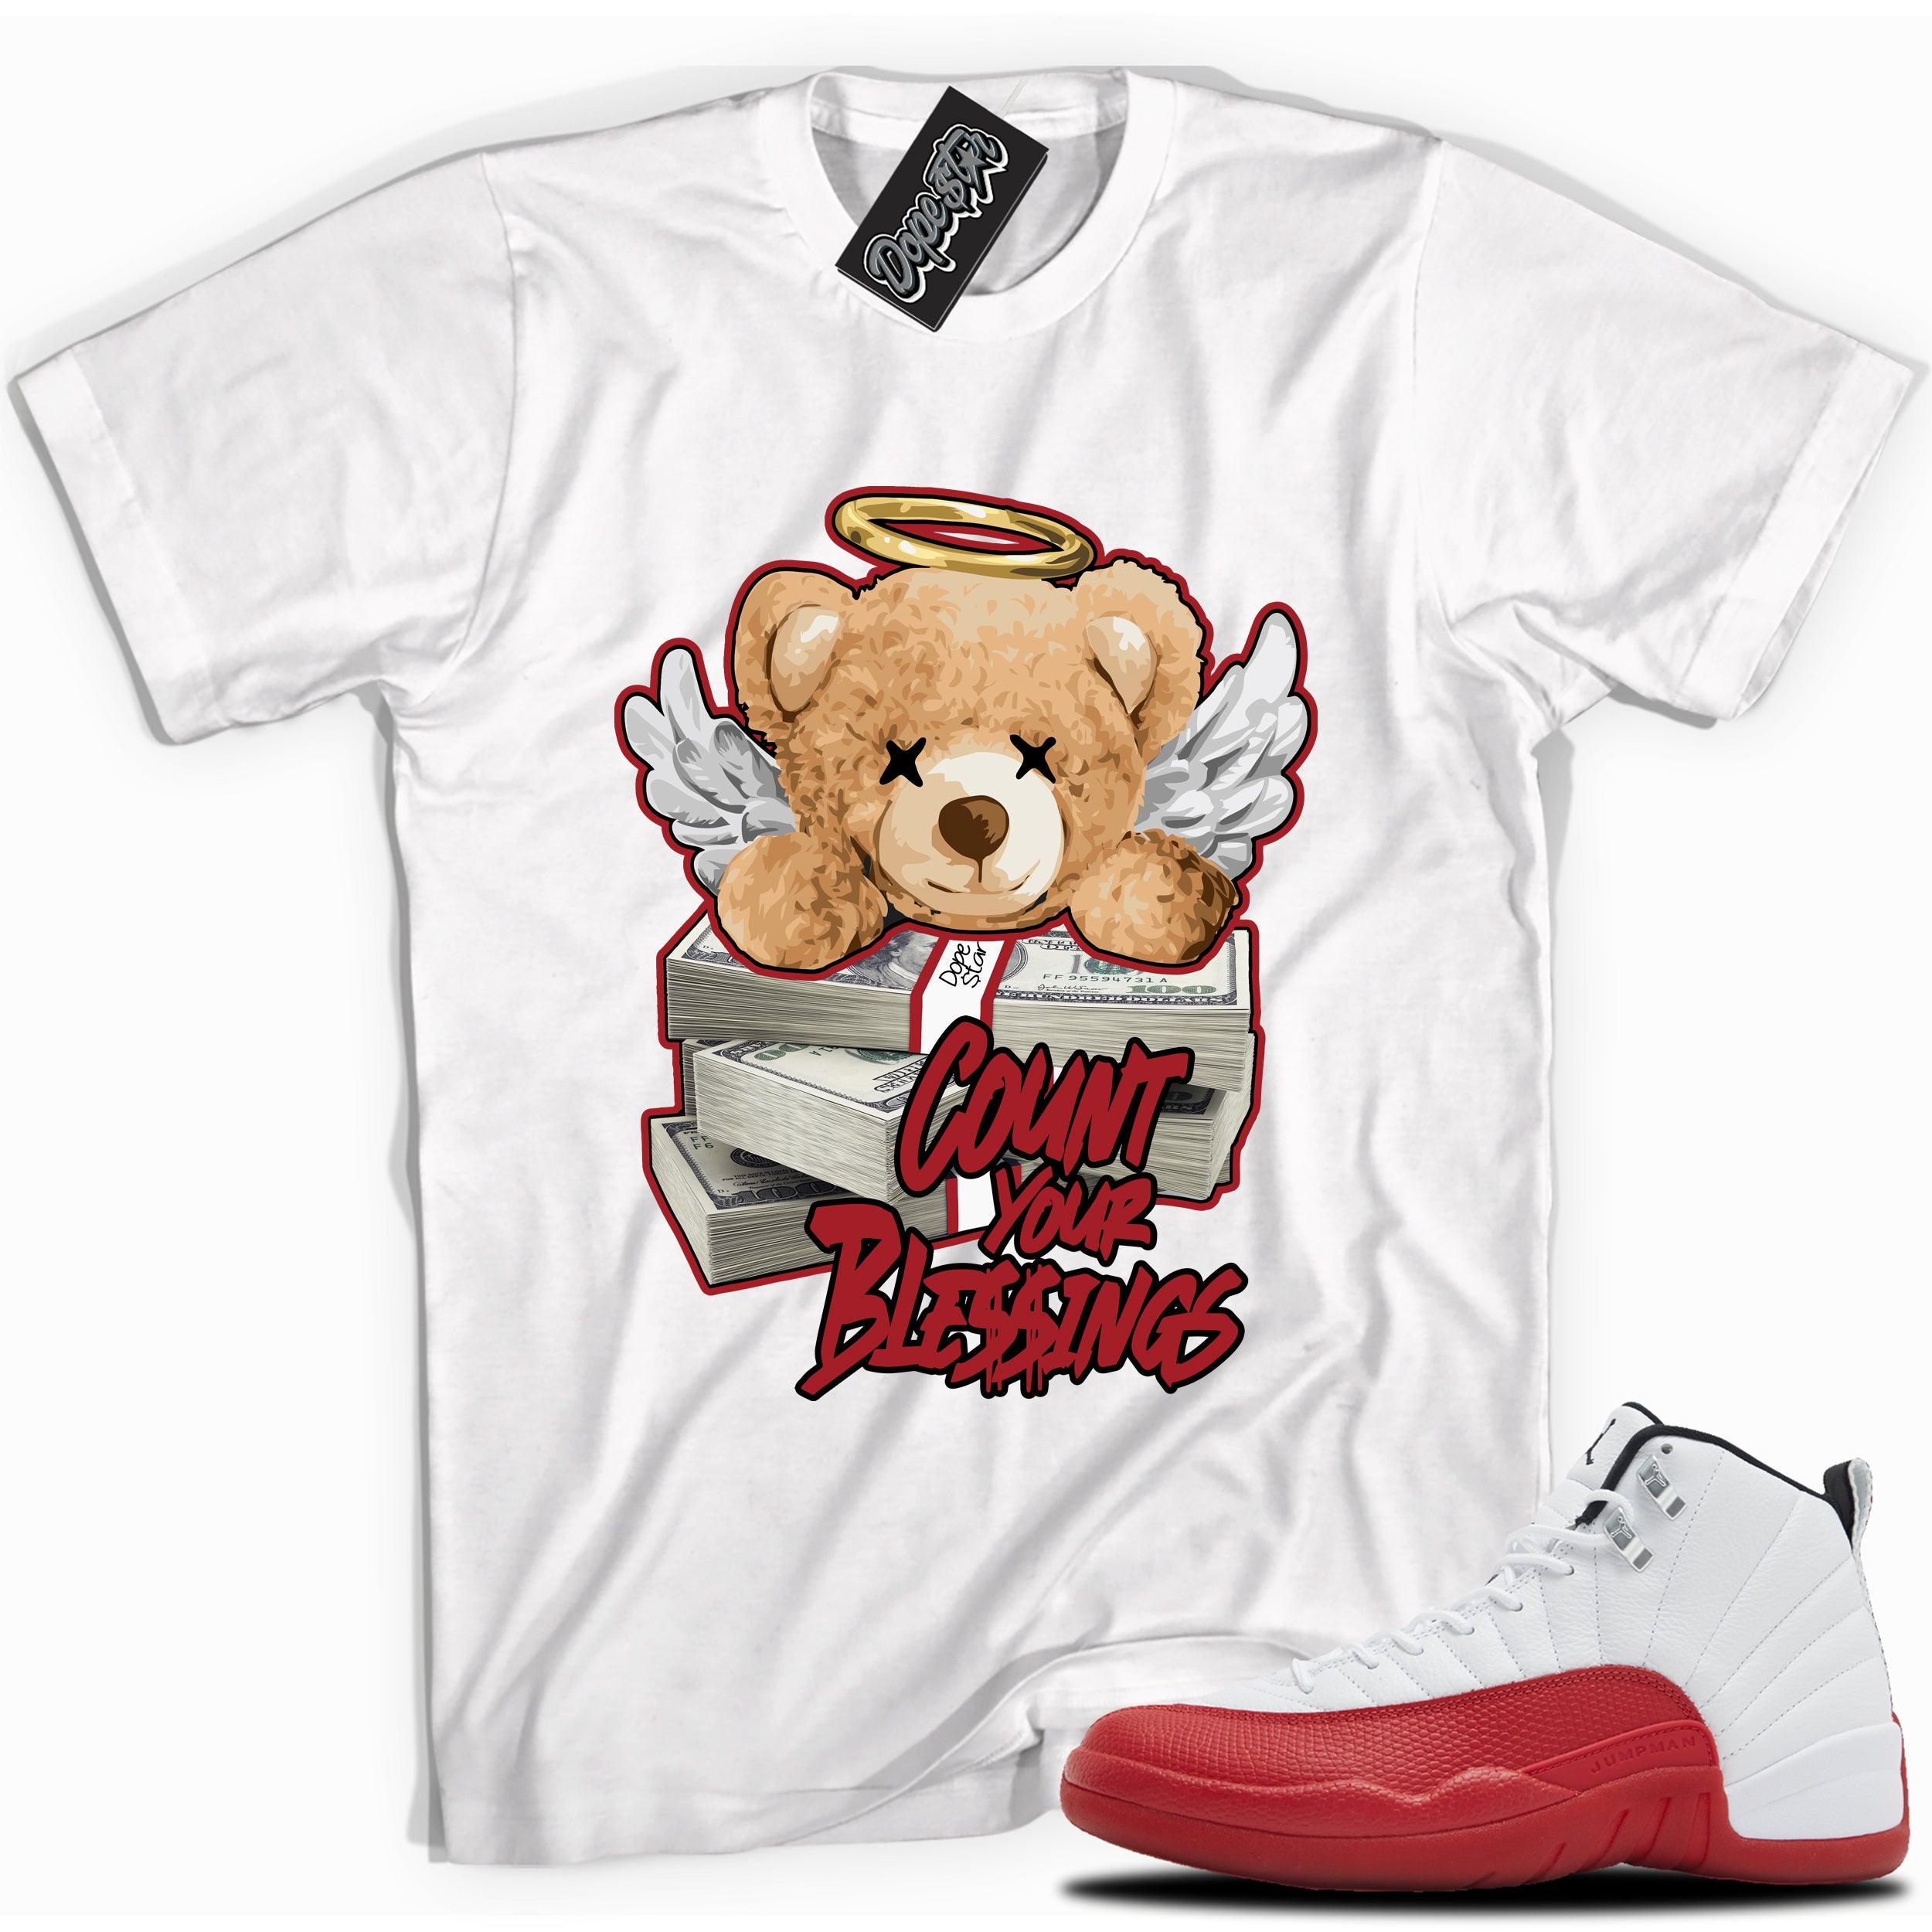 Cool White graphic tee with “ Count Your Blessings ” print, that perfectly matches Air Jordan 12 Retro Cherry Red 2023 red and white sneakers